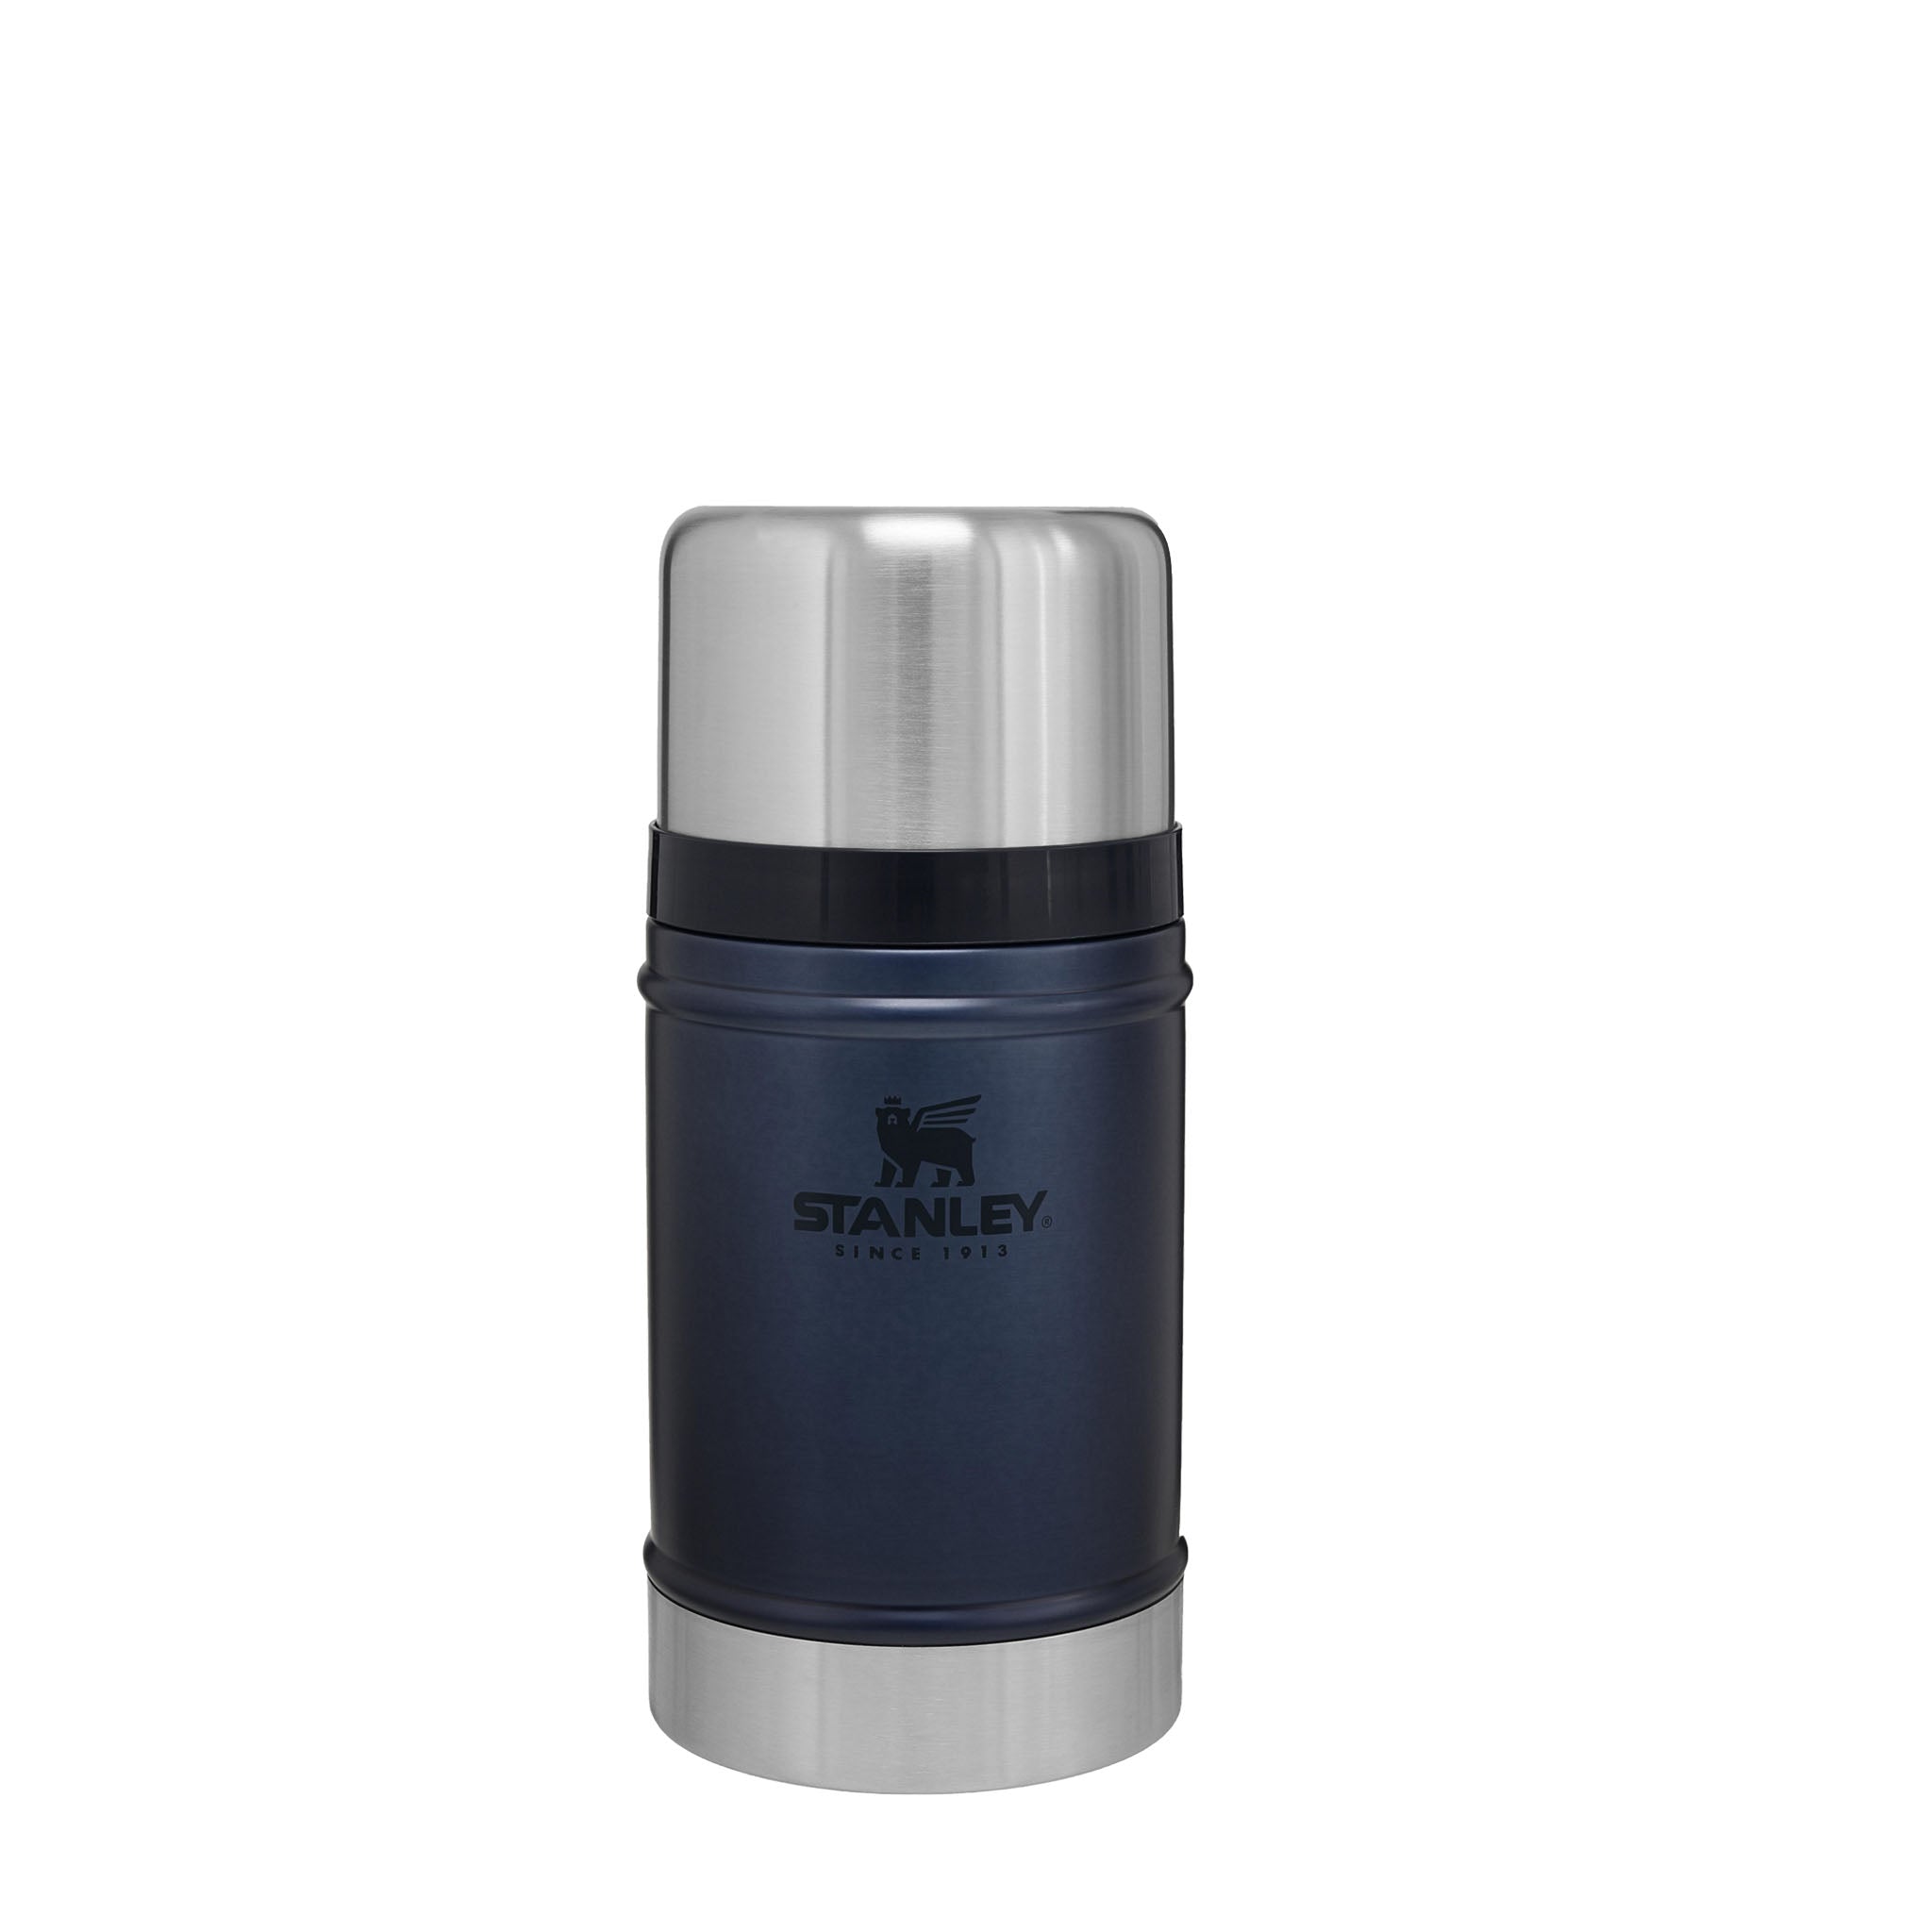 Top selling Japanese Thermos Soup Flask